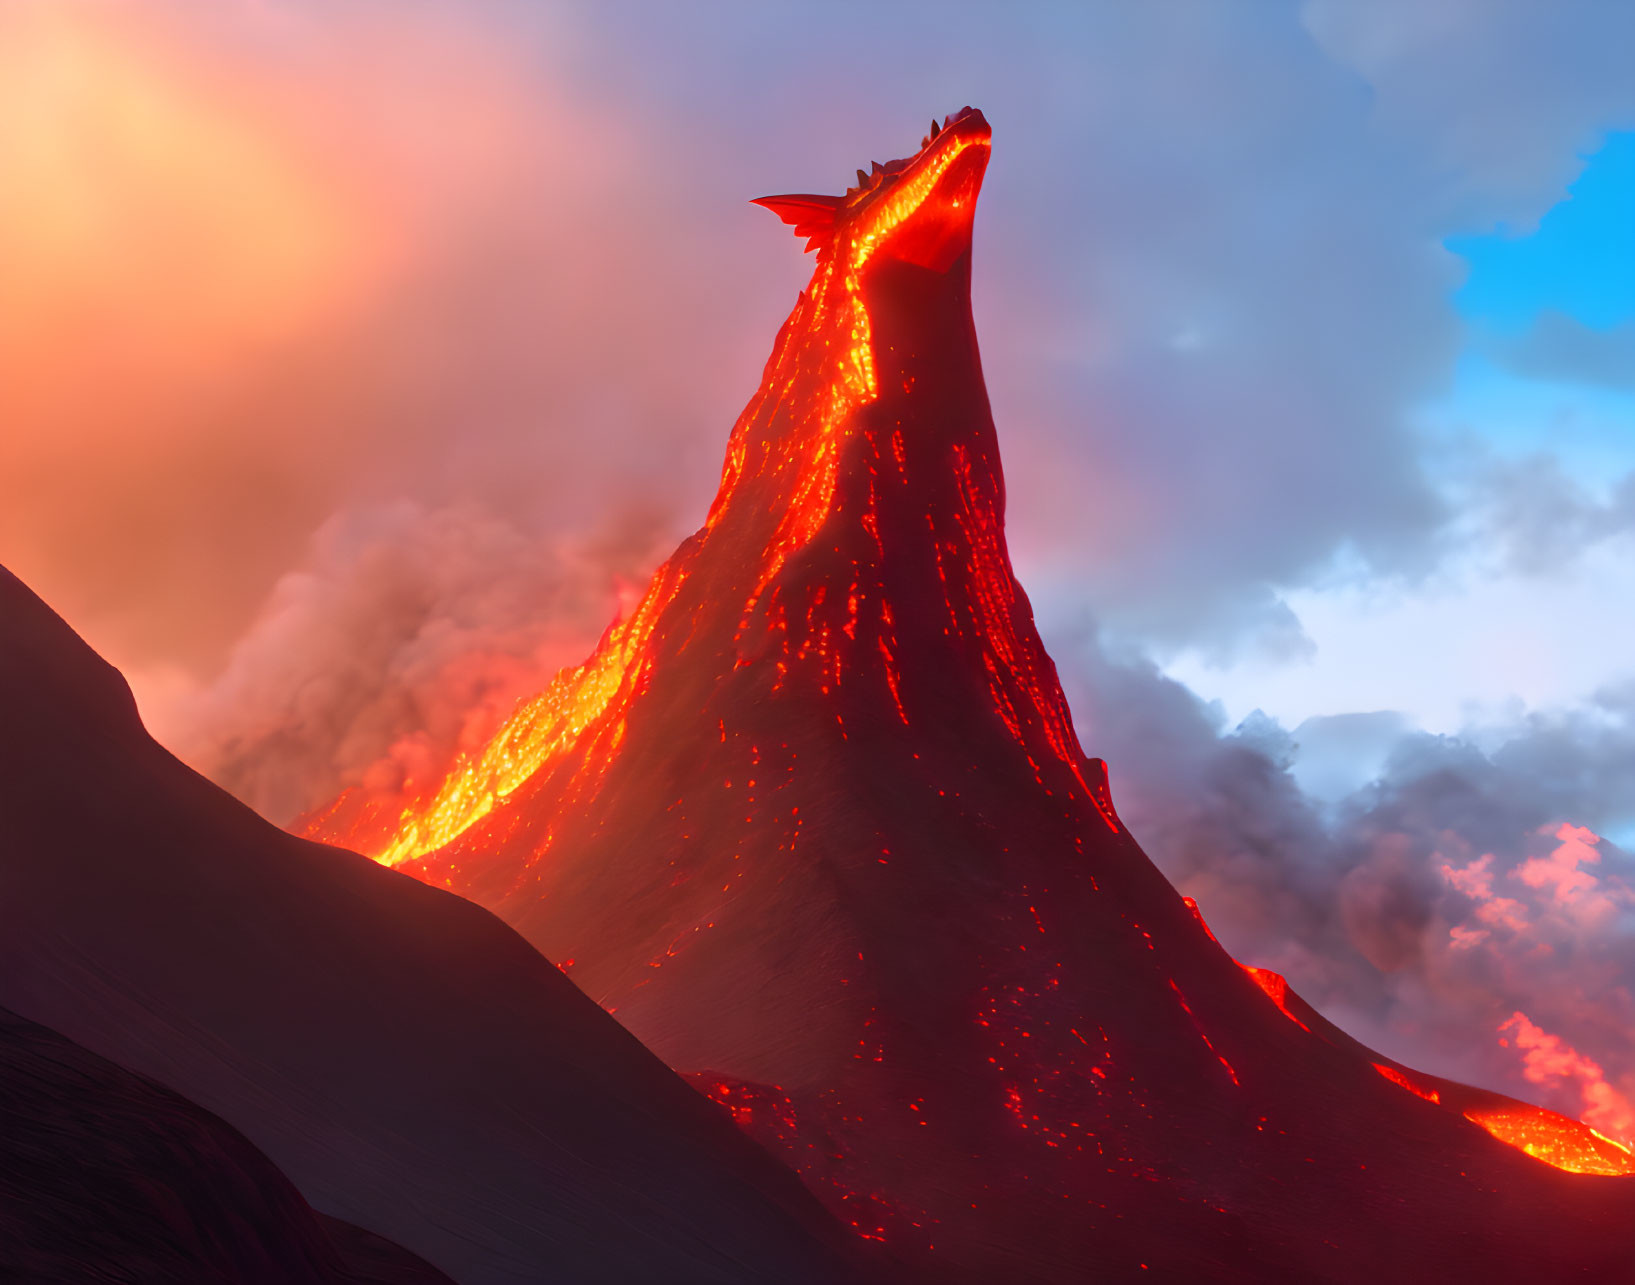 Glowing lava flow cascading down steep volcano under dramatic sky